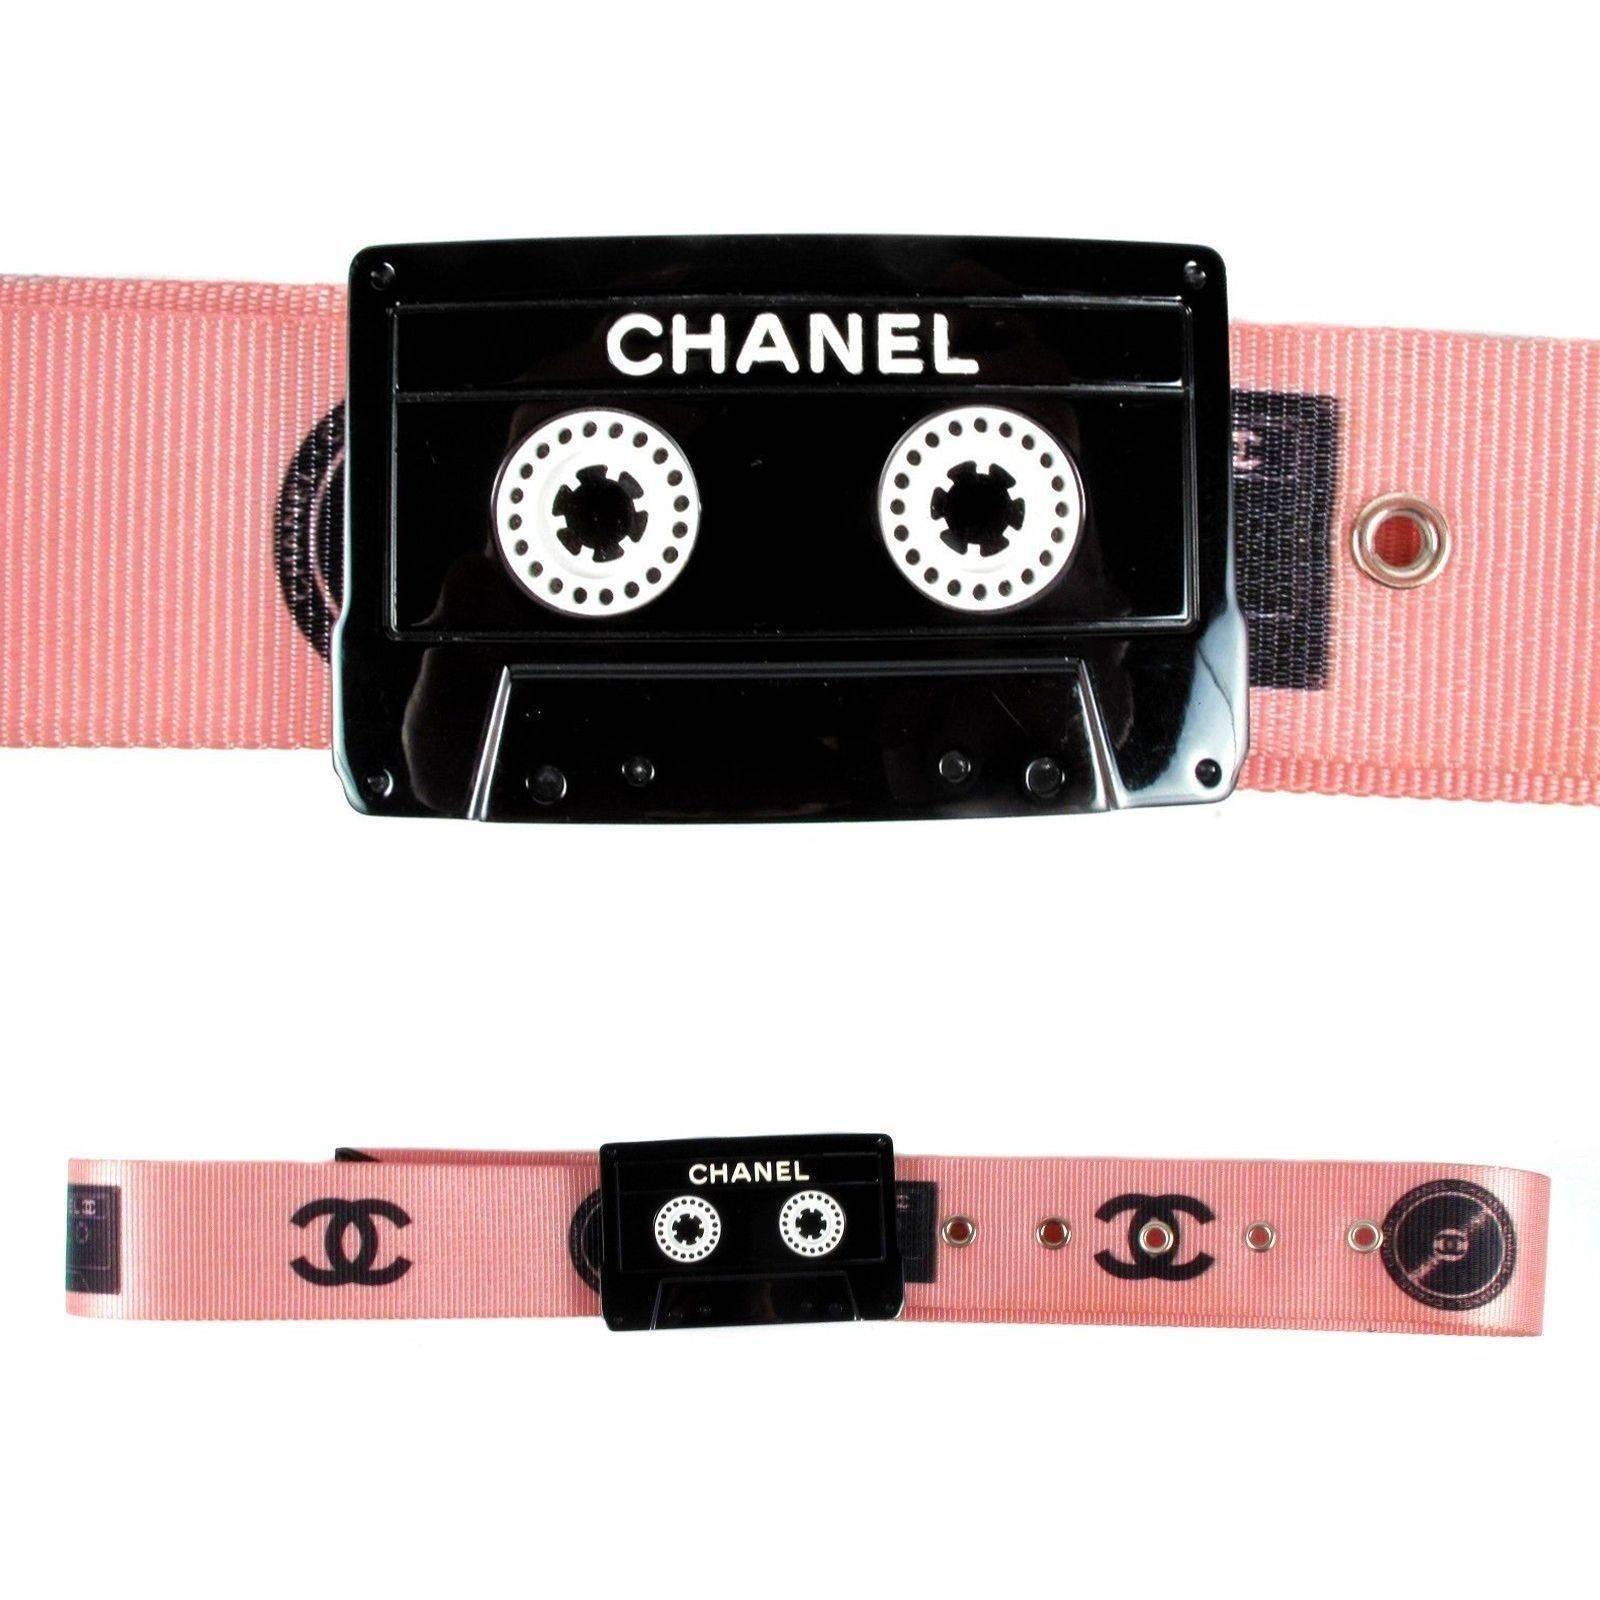 Chanel - Cassette Tape Belt

extremely rare collectors item.

this belt recently sold online for $3000.00

this will match your chanel cassette clutch which sells for $10,000 - 15,000

Color: Pink

Material: Fabric 

Tag Size: 80 / 32